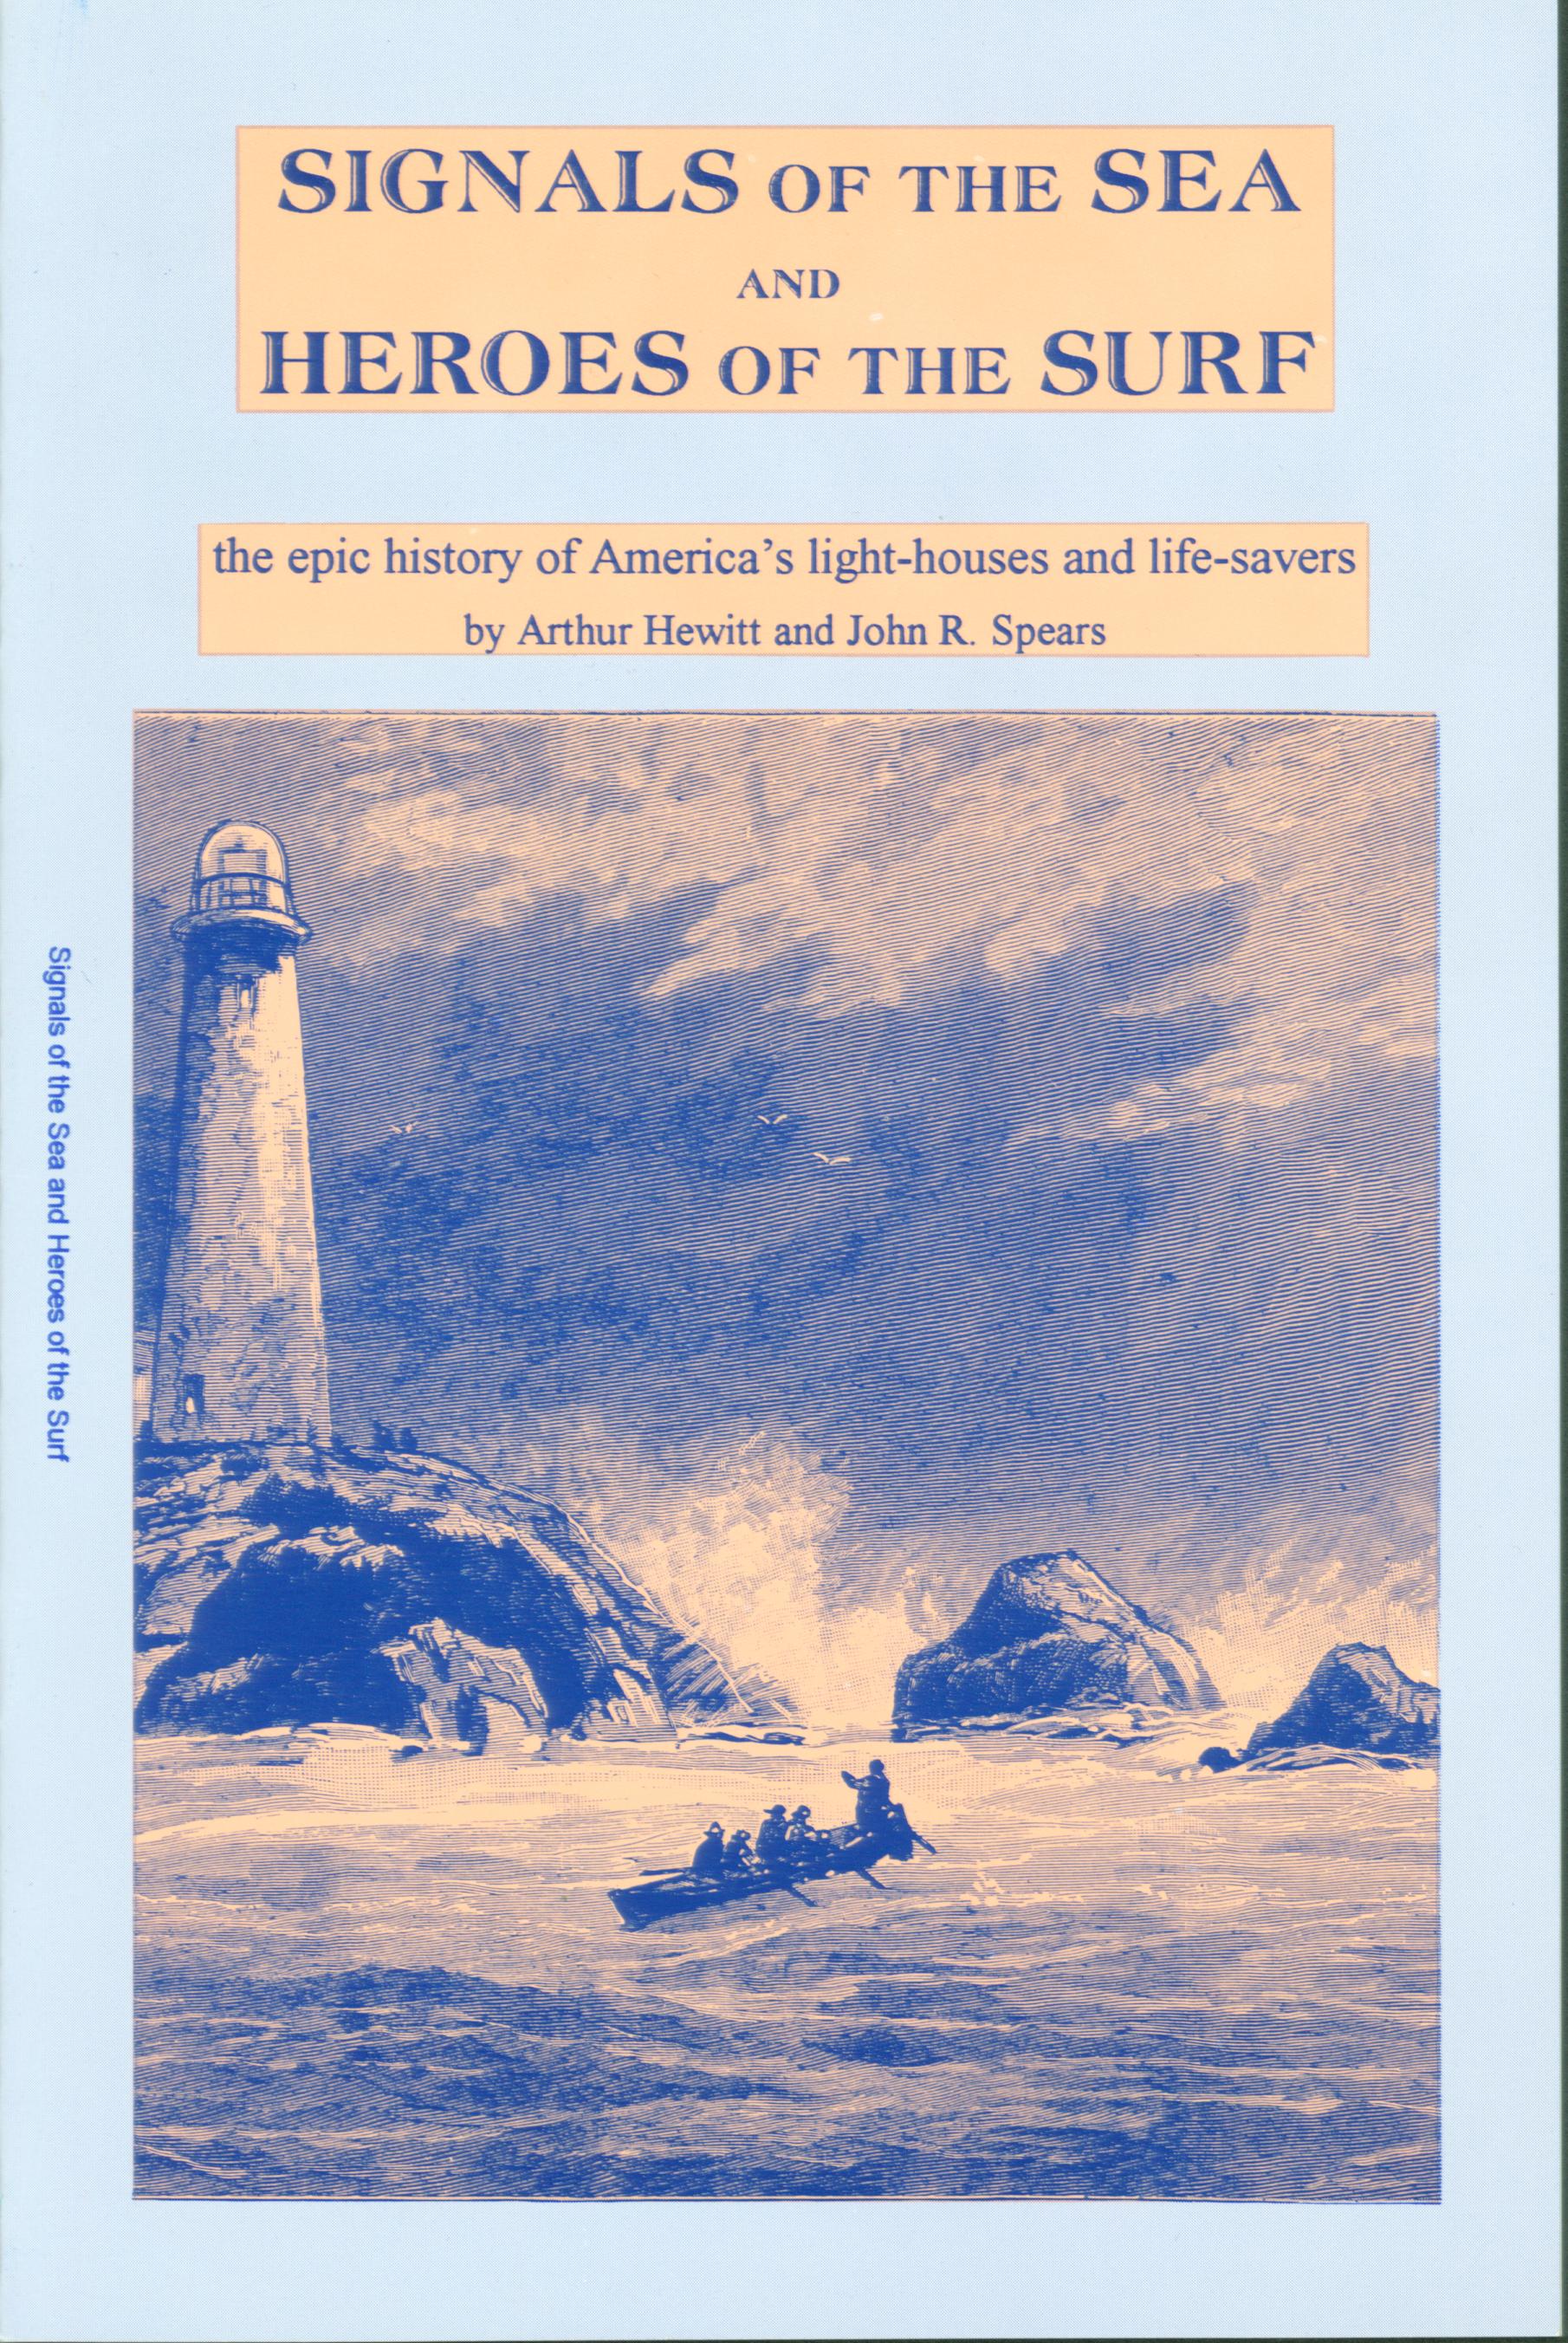 IGNALS OF THE SEA AND HEROES OF THE SURF: the epic story of America's light-houses and life-savers, written at their heyday. 